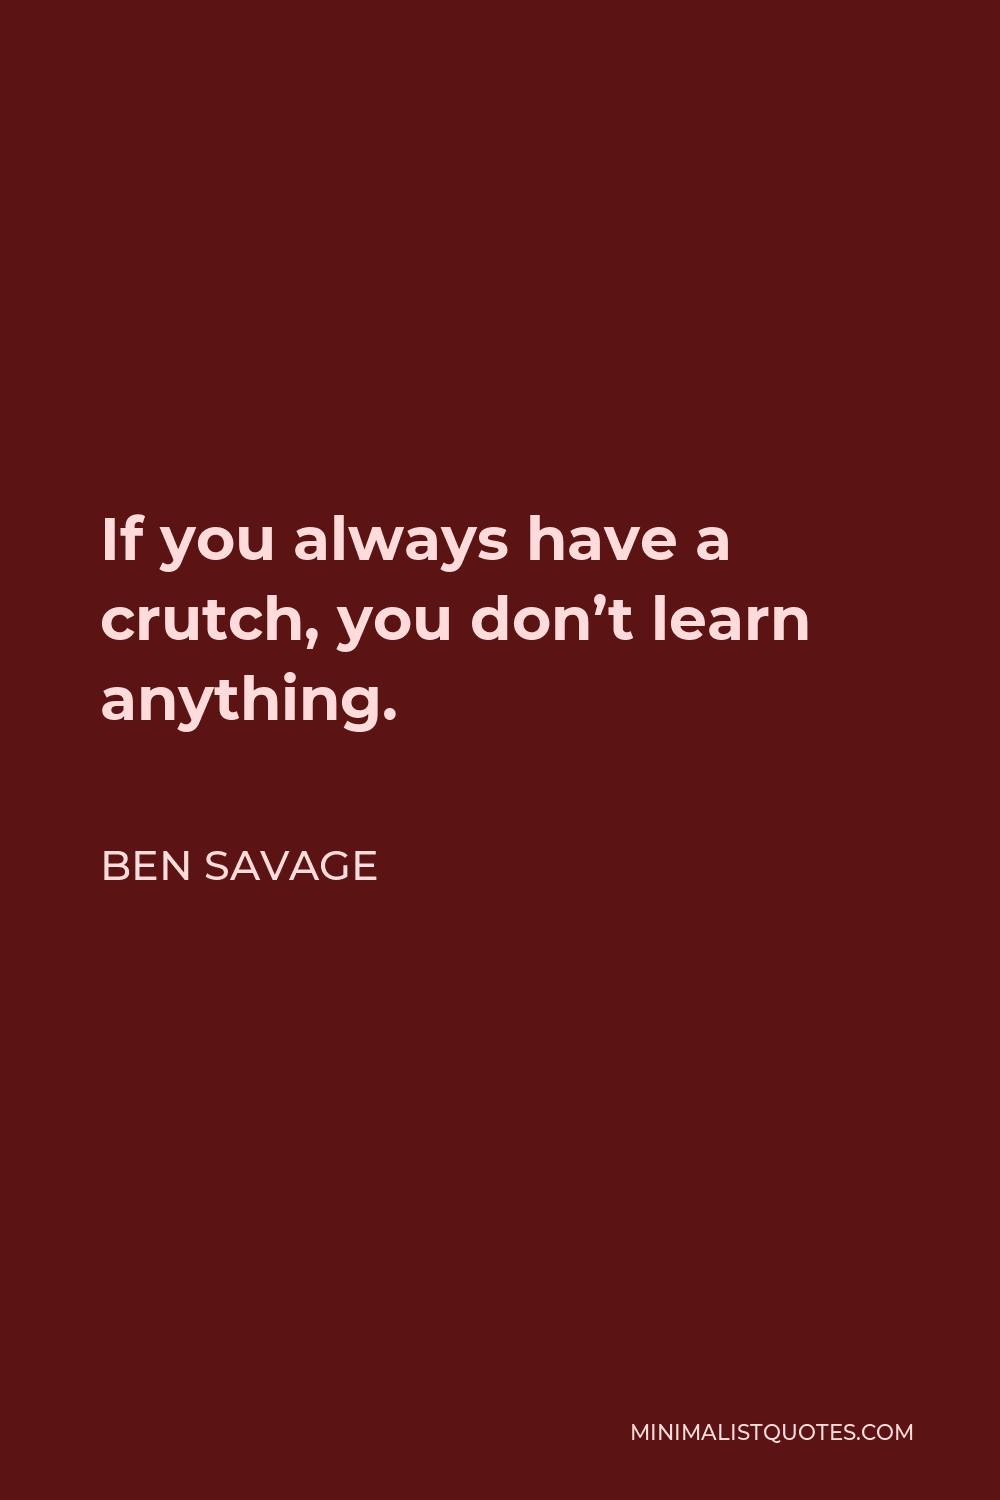 Ben Savage Quote - If you always have a crutch, you don’t learn anything.